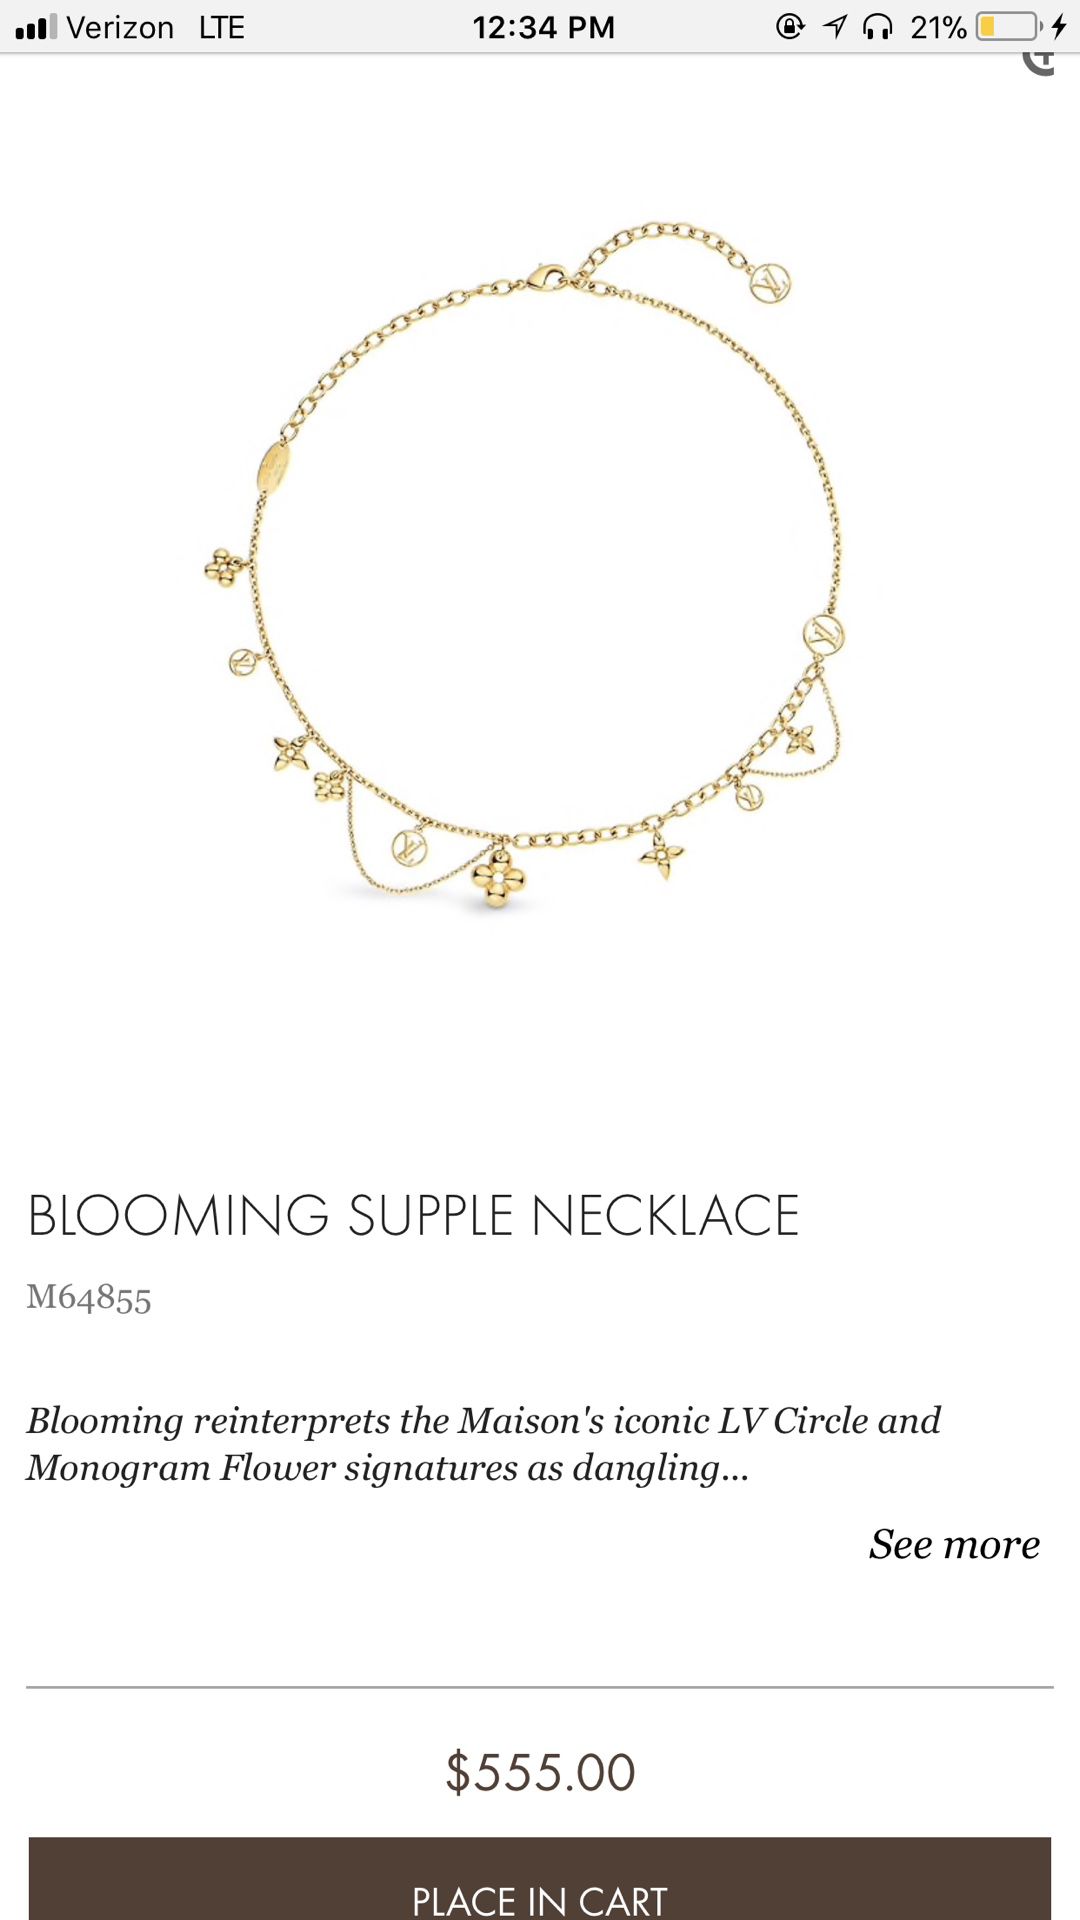 Louis Vuitton - Collier souple Blooming - Necklace - Catawiki